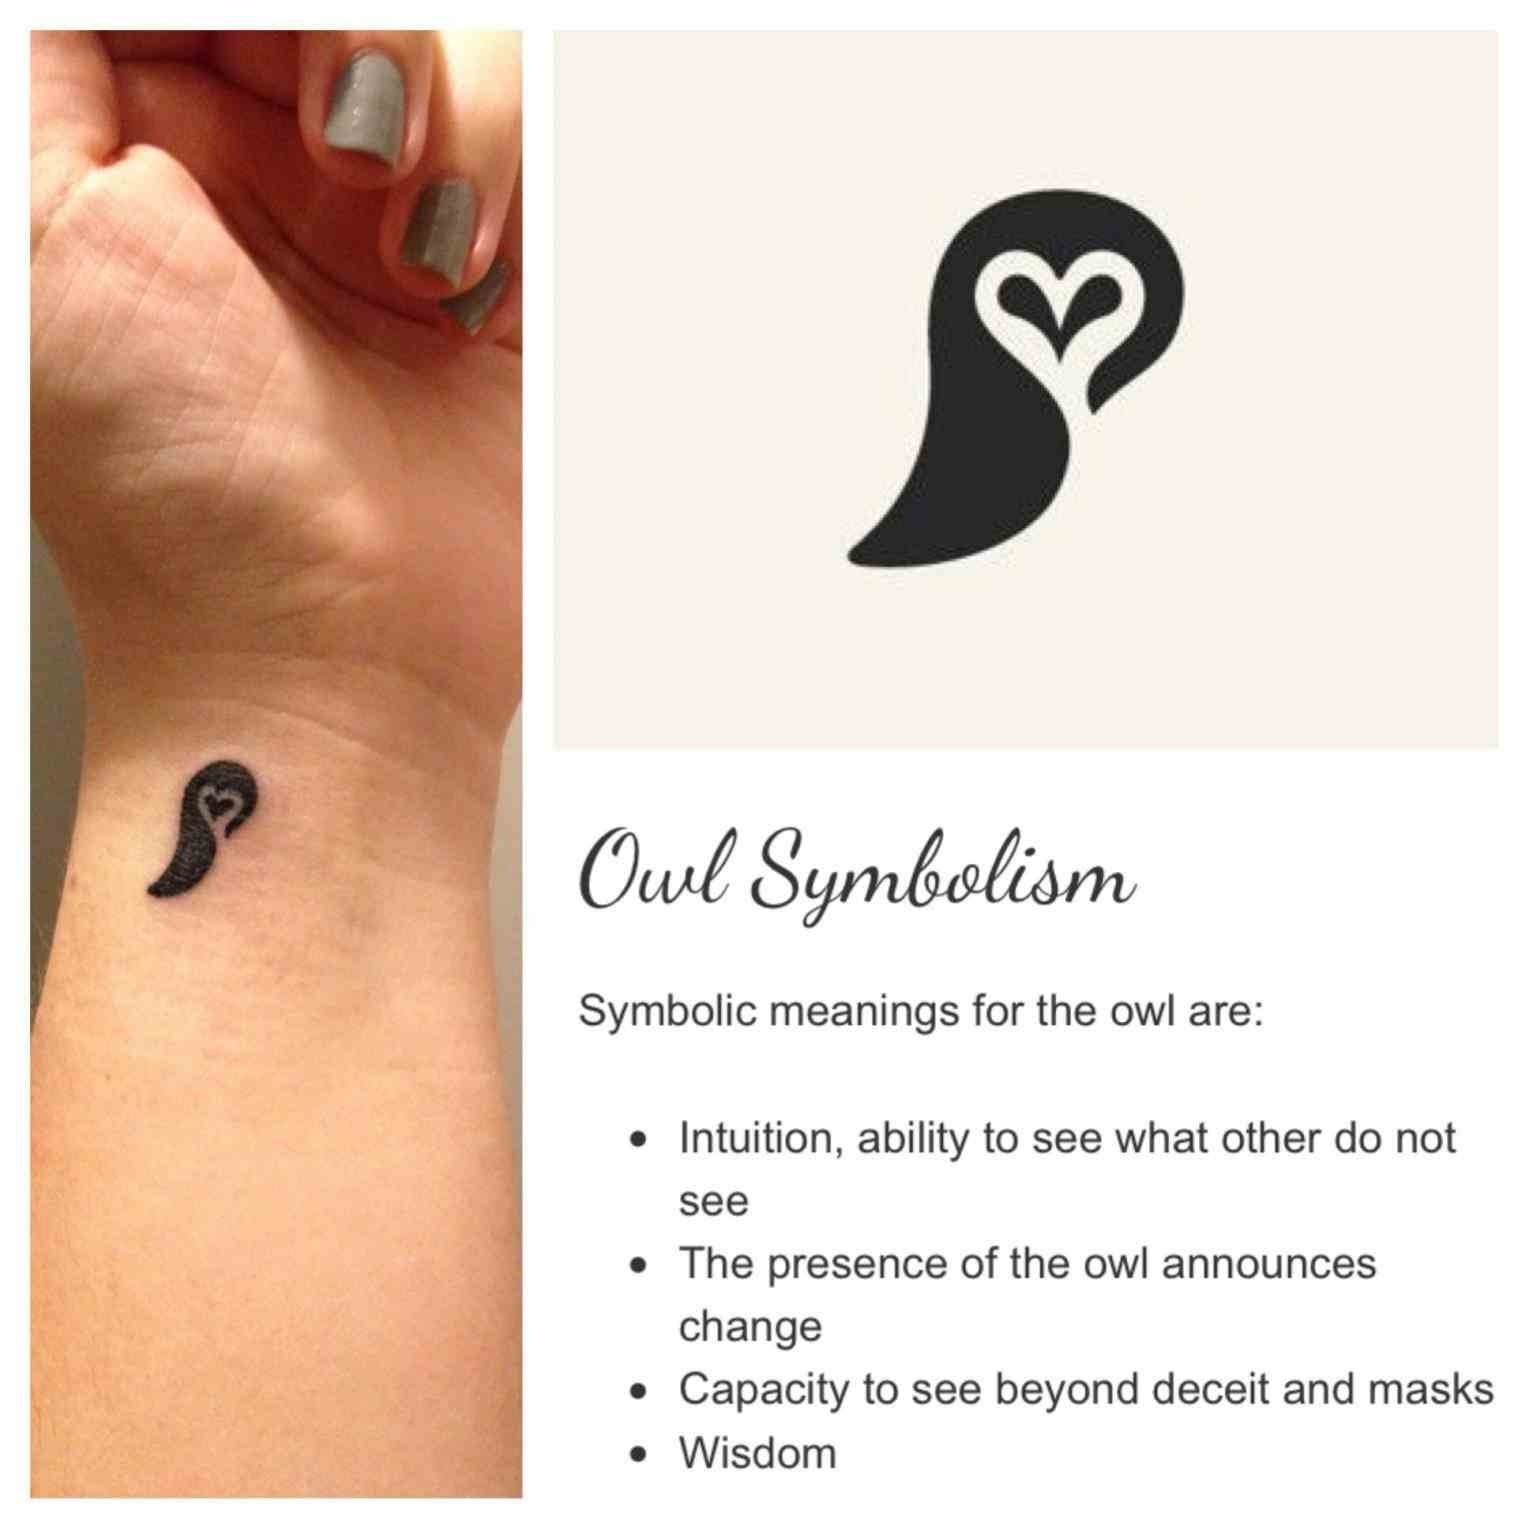 10 Spectacular Small Tattoo Ideas With Meaning small tattoos with meaning zoeken small tattoos small geometric 2022